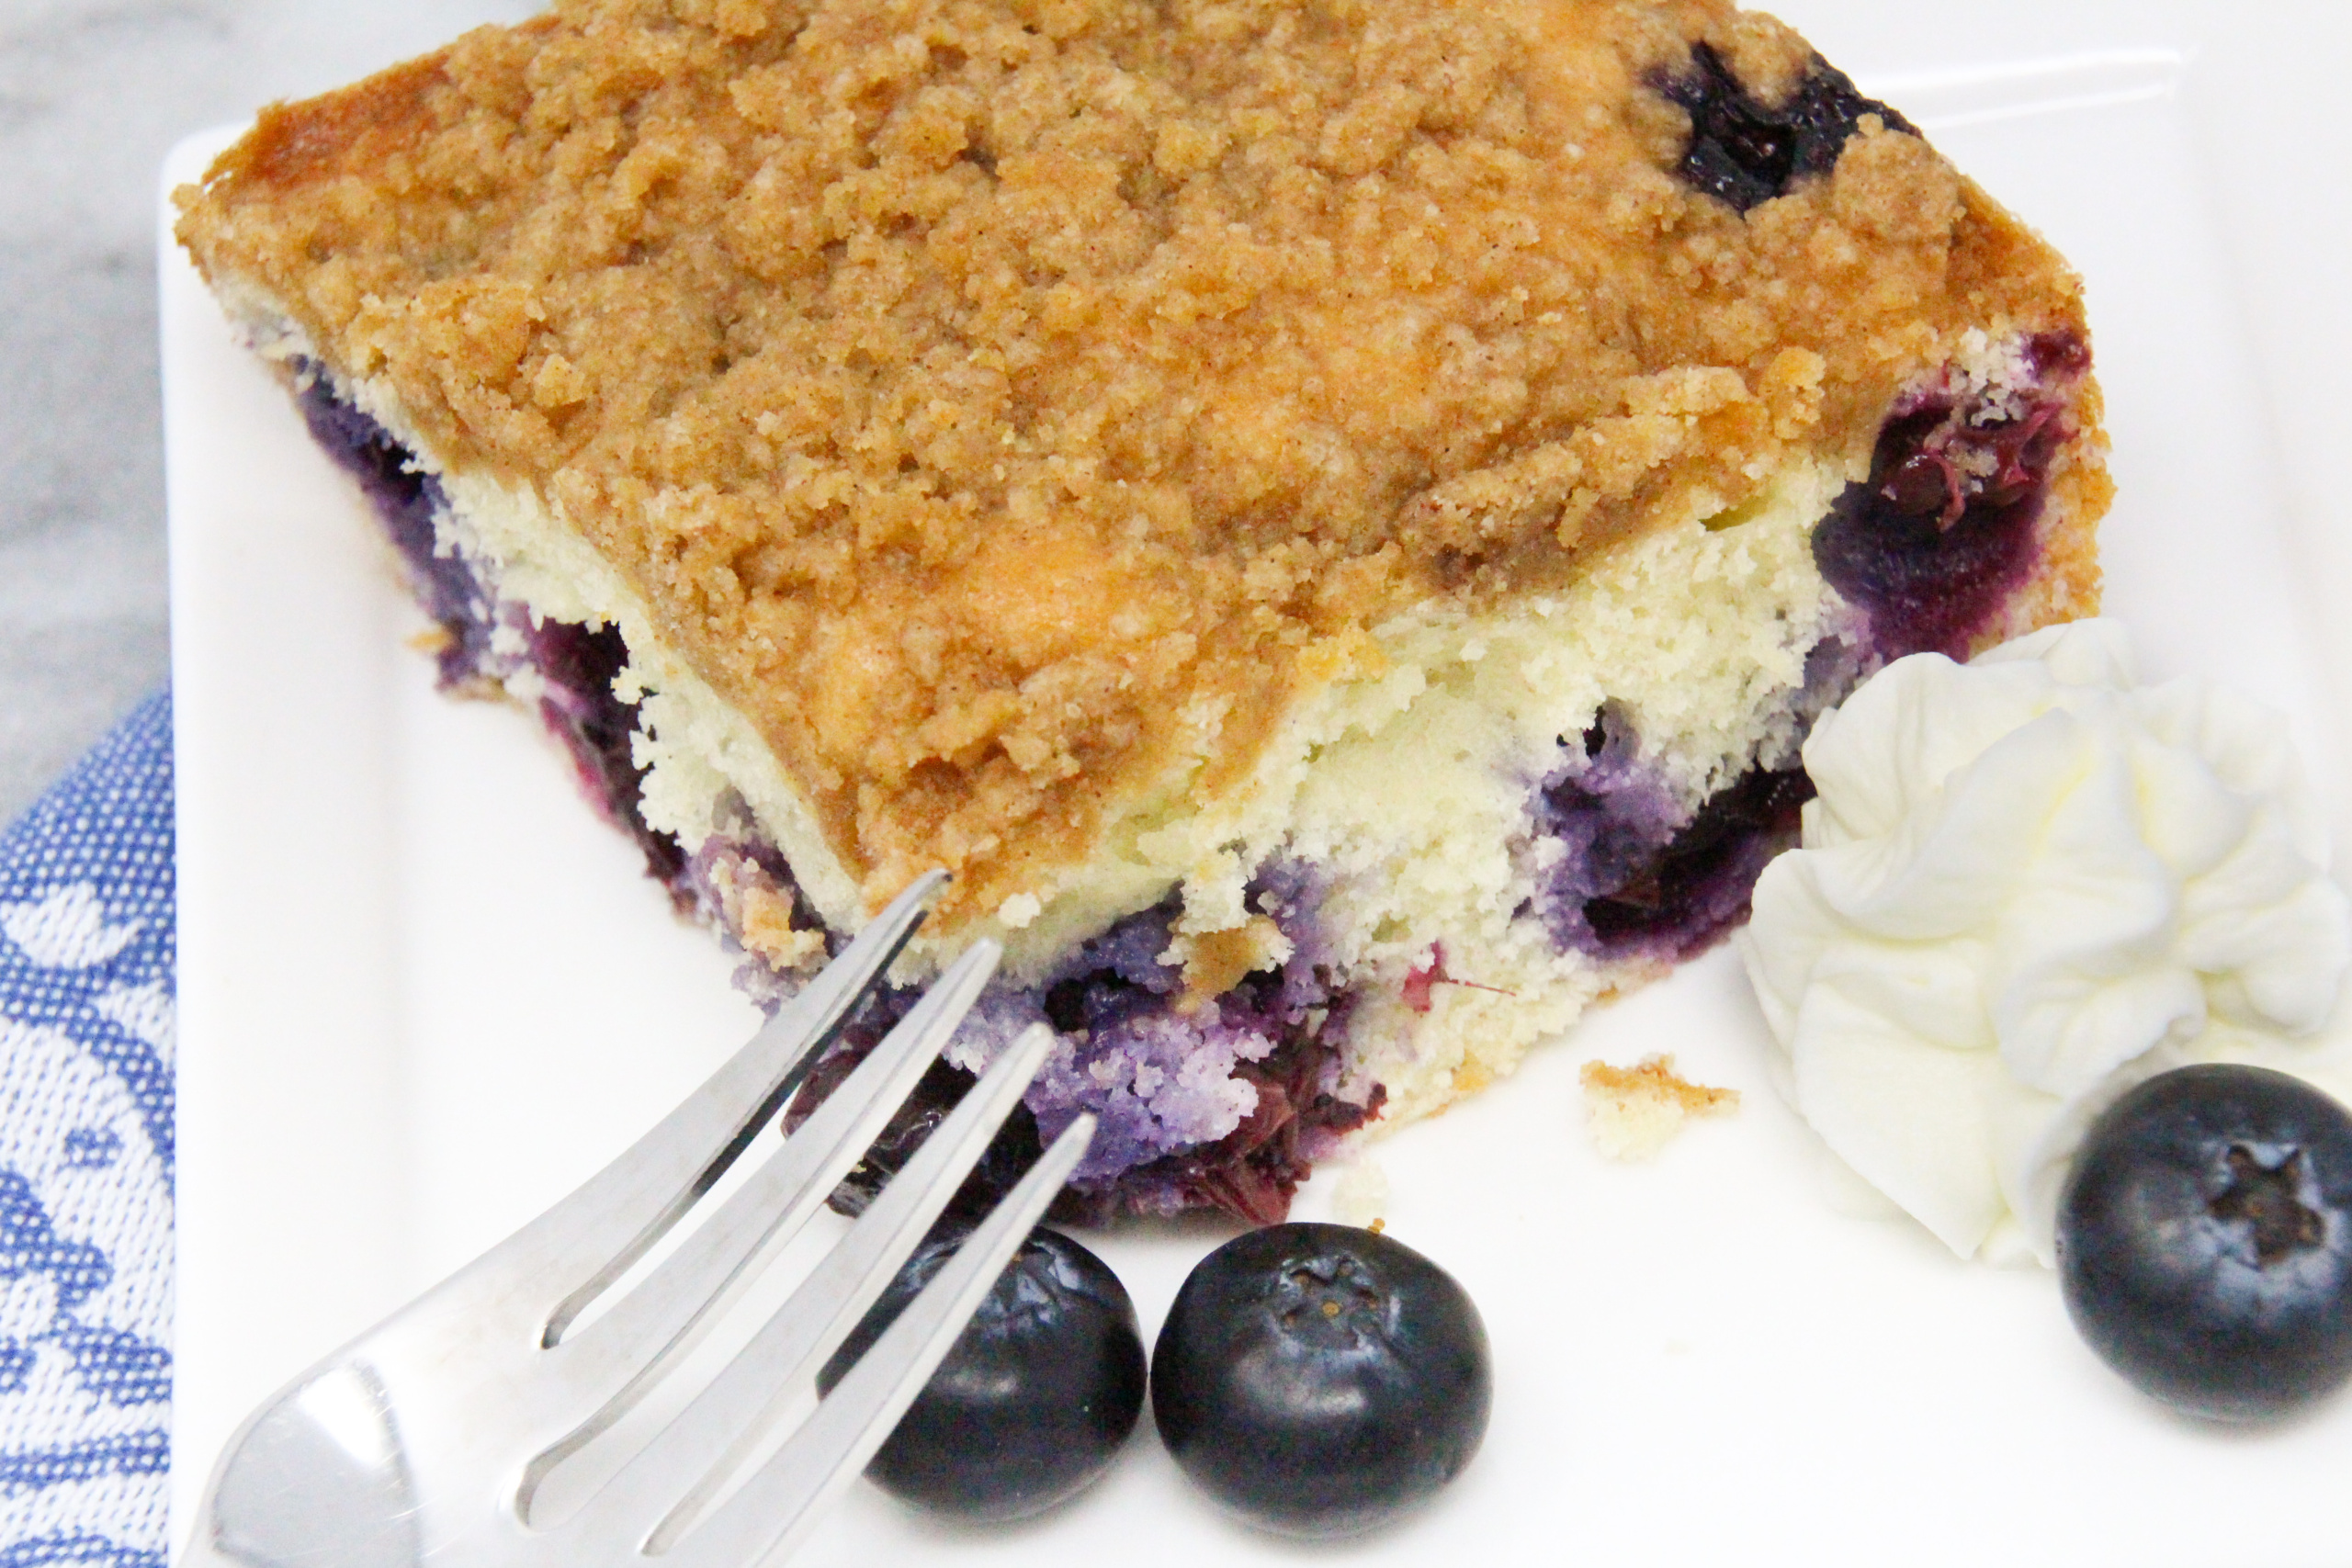 Blueberry Coffee Cake with Crumble is chock full of fresh blueberries in a tender vanilla cake. The cinnamon, brown sugar-based crumble adds both flavor and a pleasing crunchy texture. Recipe shared with permission granted by Krista Davis, author of A COLORFUL SCHEME. 